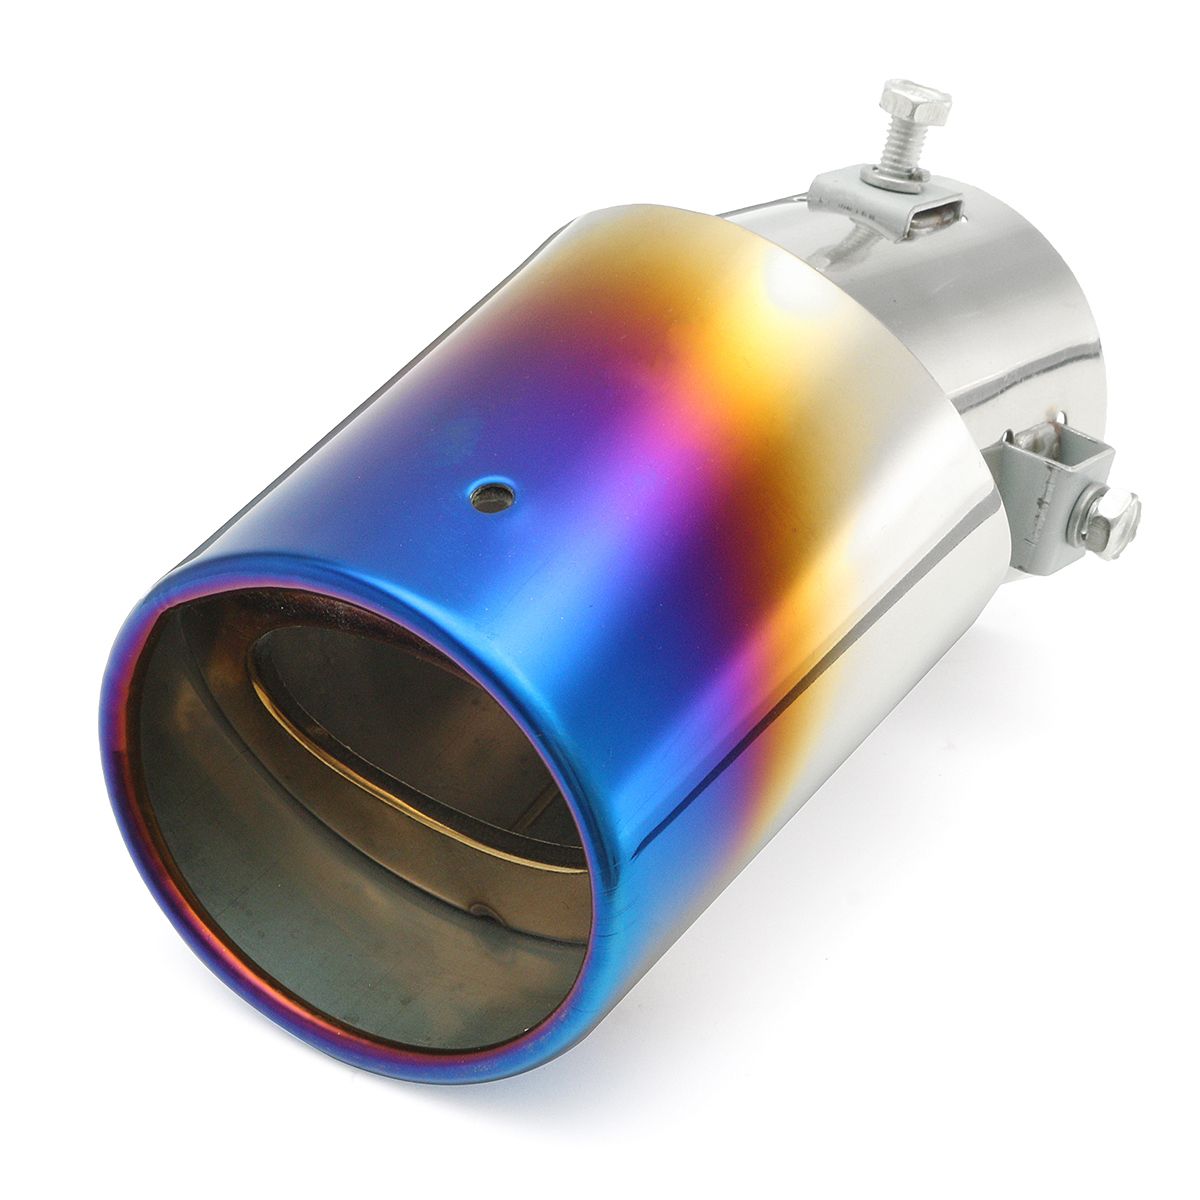 63mm-Inlet-Car-Exhaust-Muffler-Tip-Pipe-Stainless-Steel-Chrome-Grilled-Blue-1143003